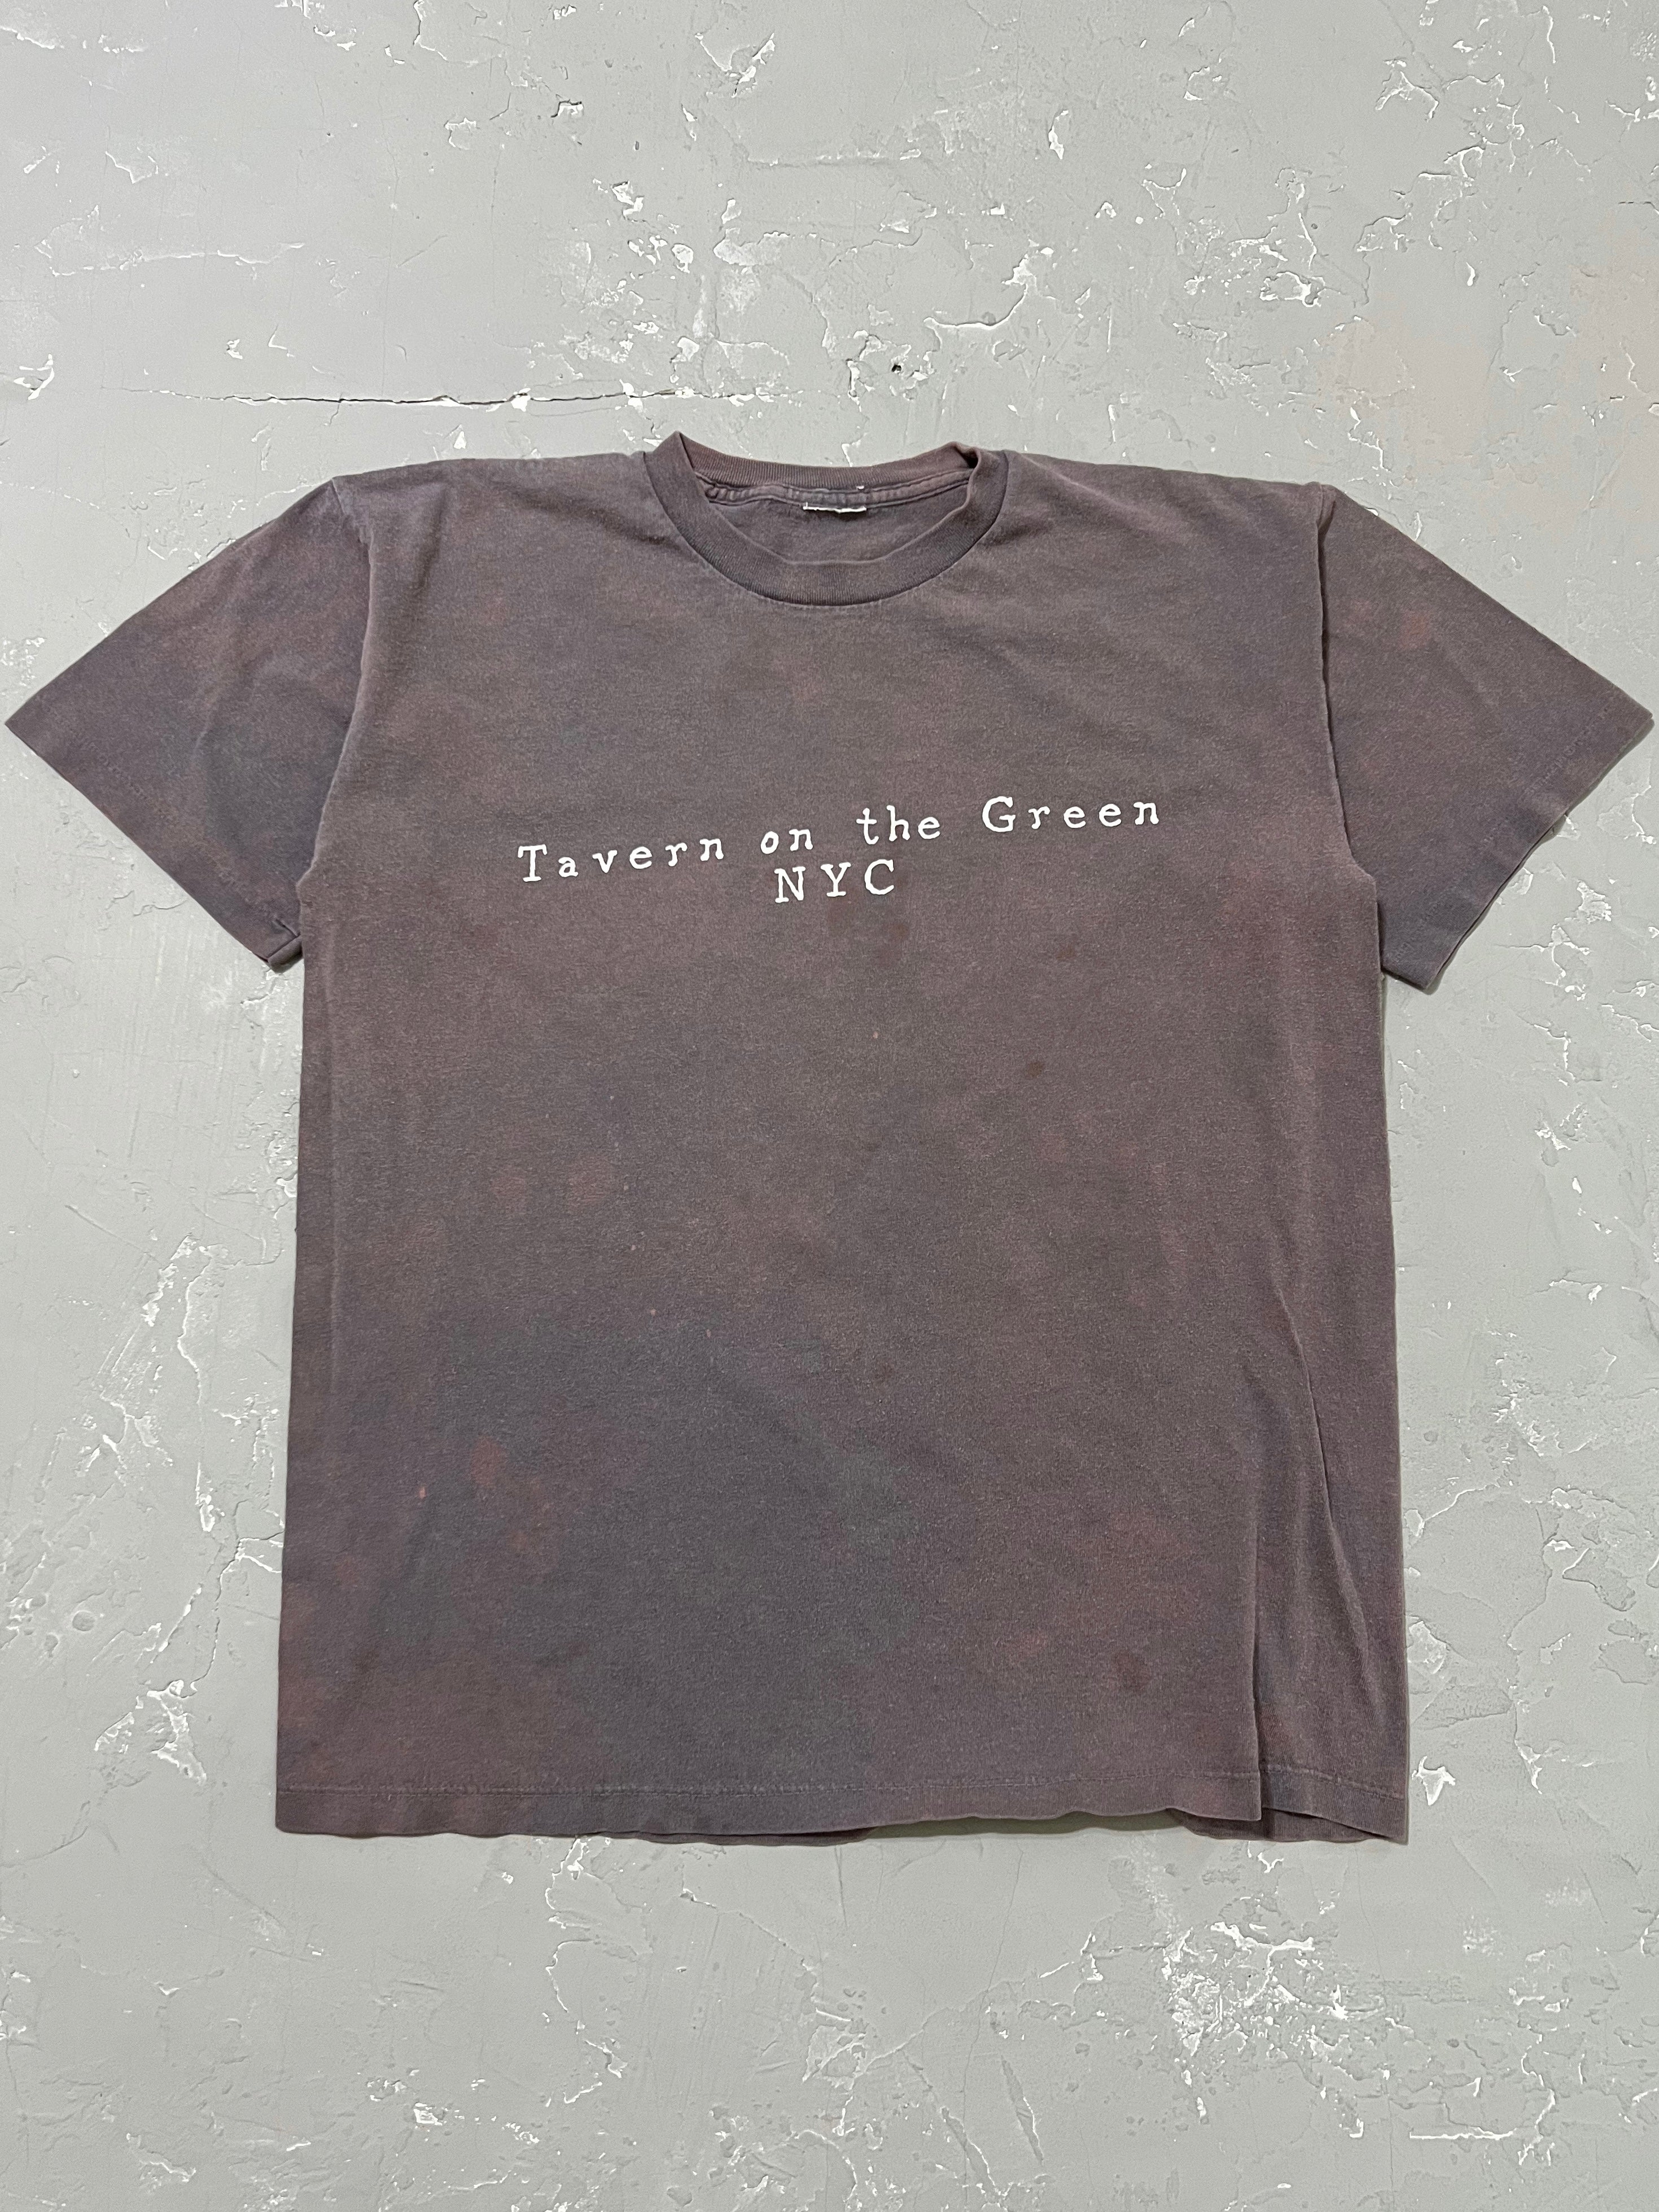 1990s Sun Bleached “Tavern on the Green” Tee [L]